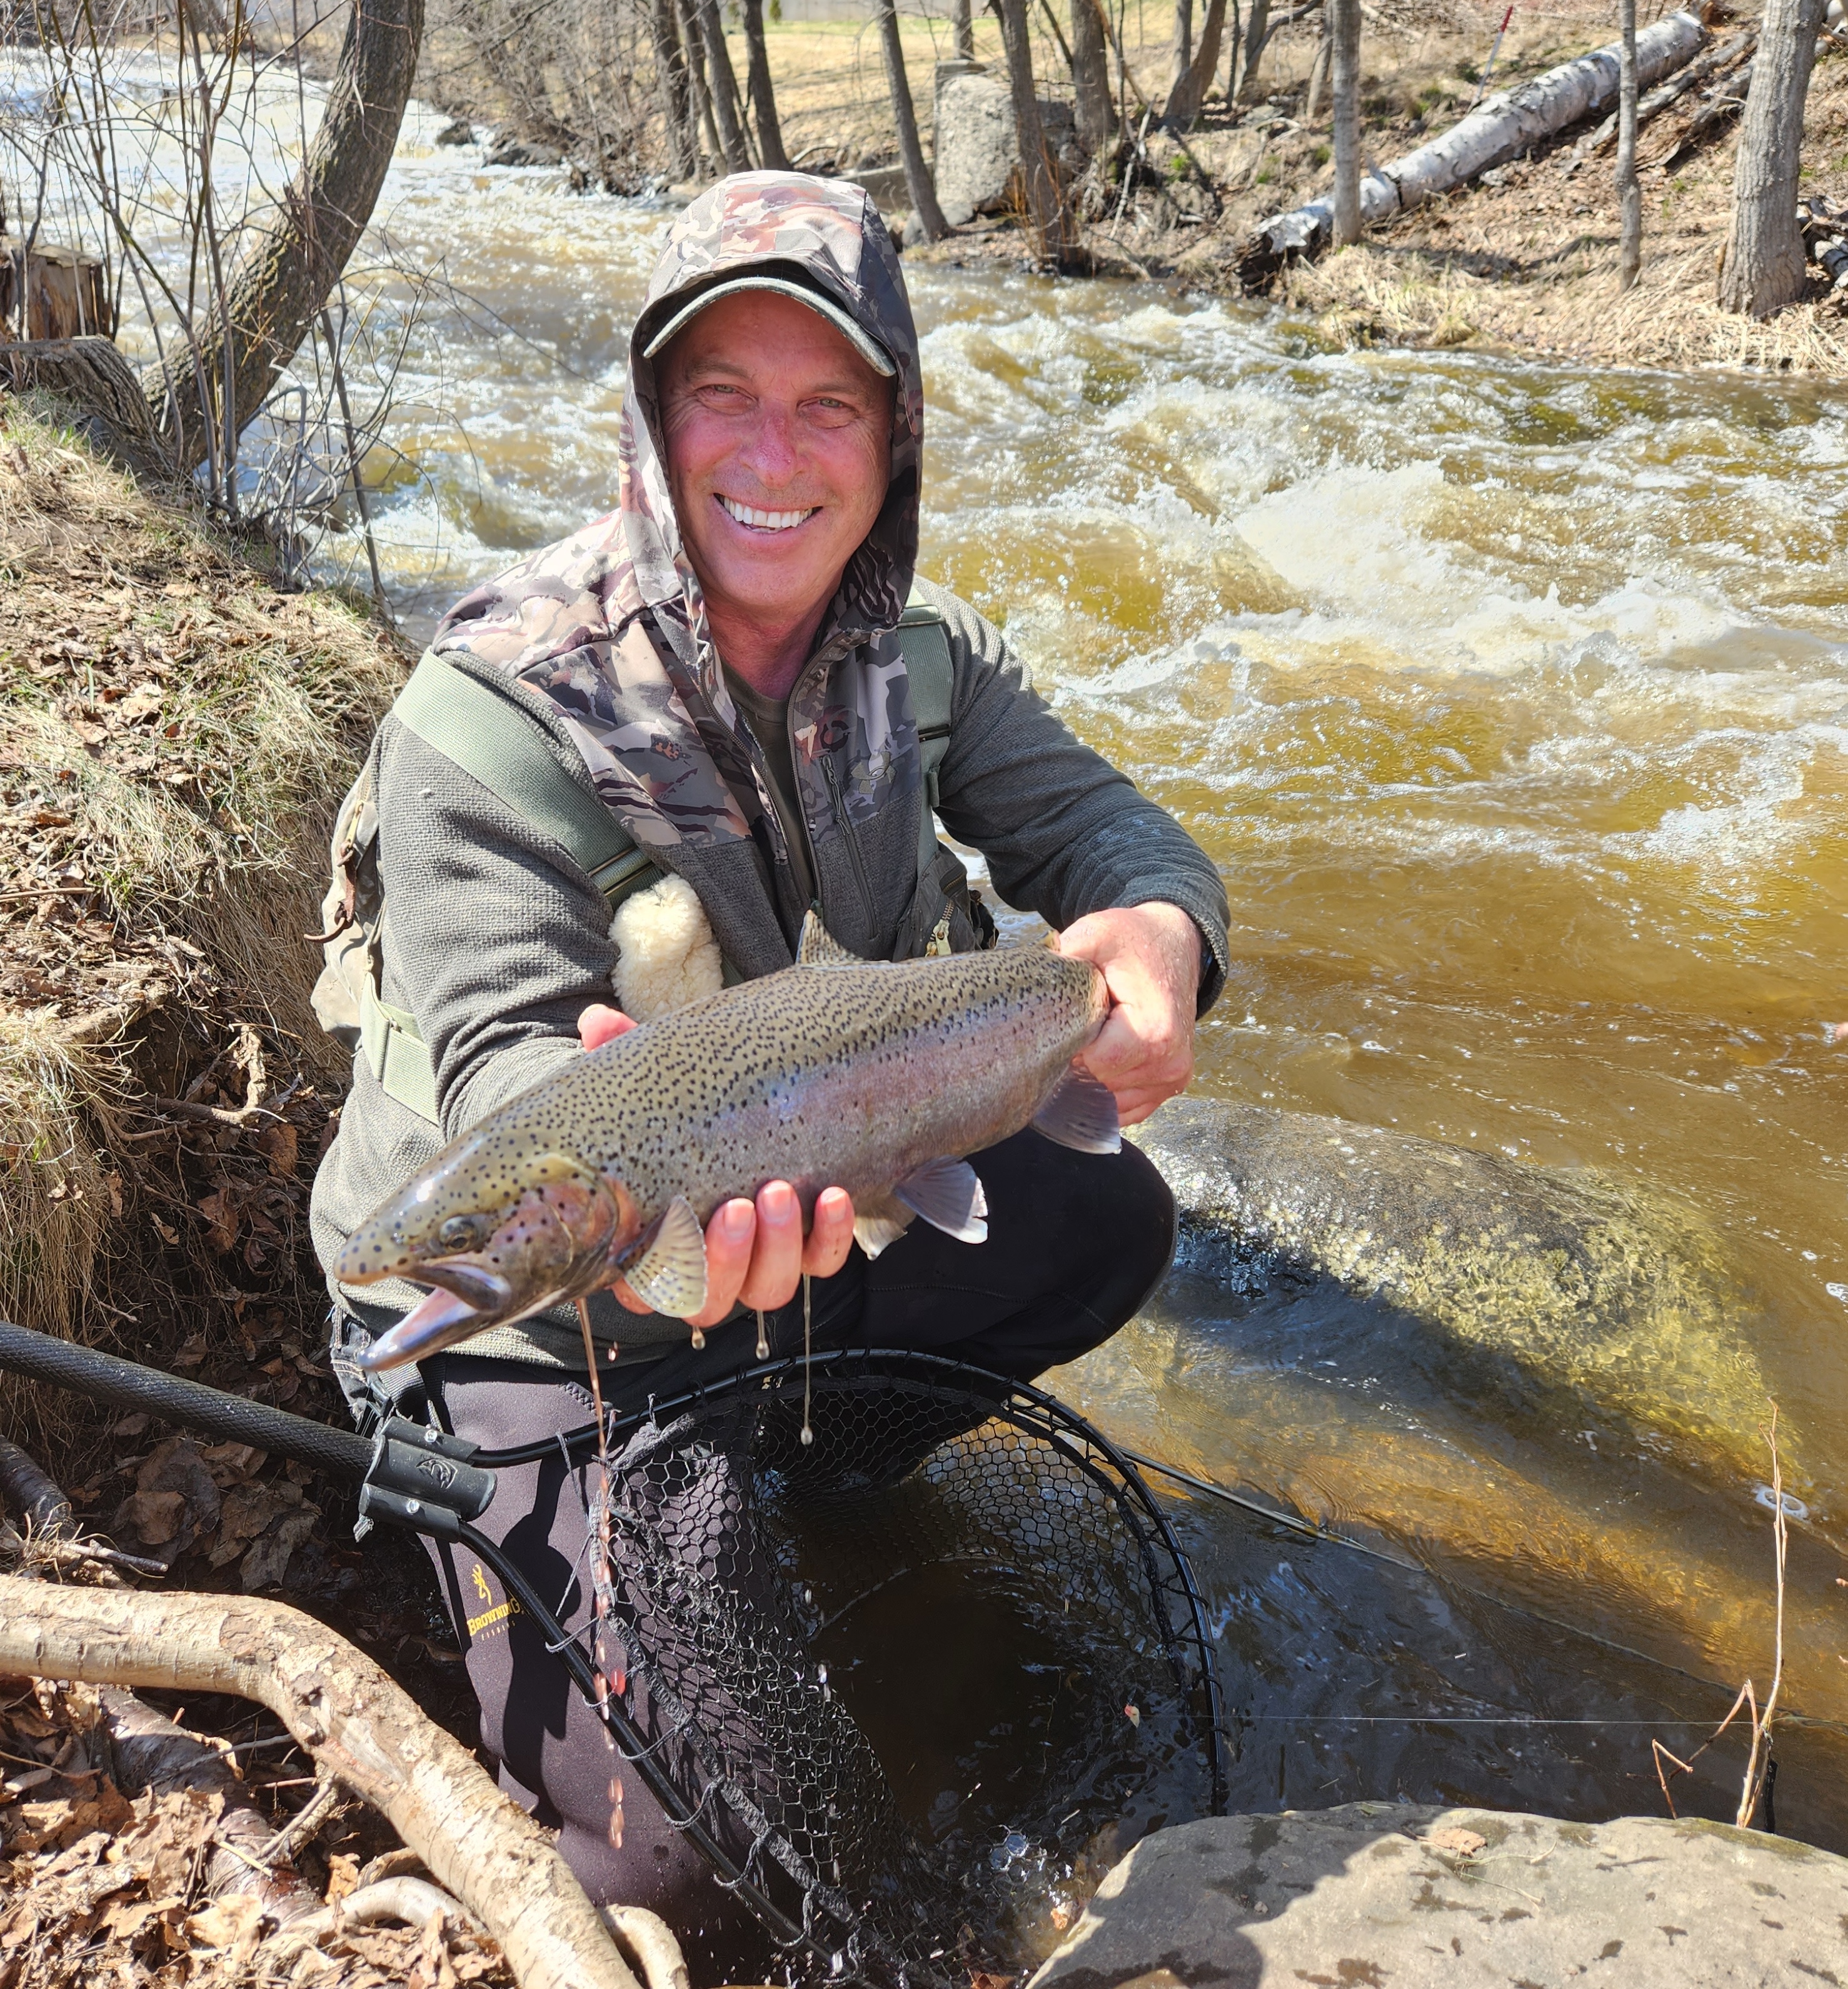 A smiling man crouching in a rocky, rushing stream, holding a large fish.